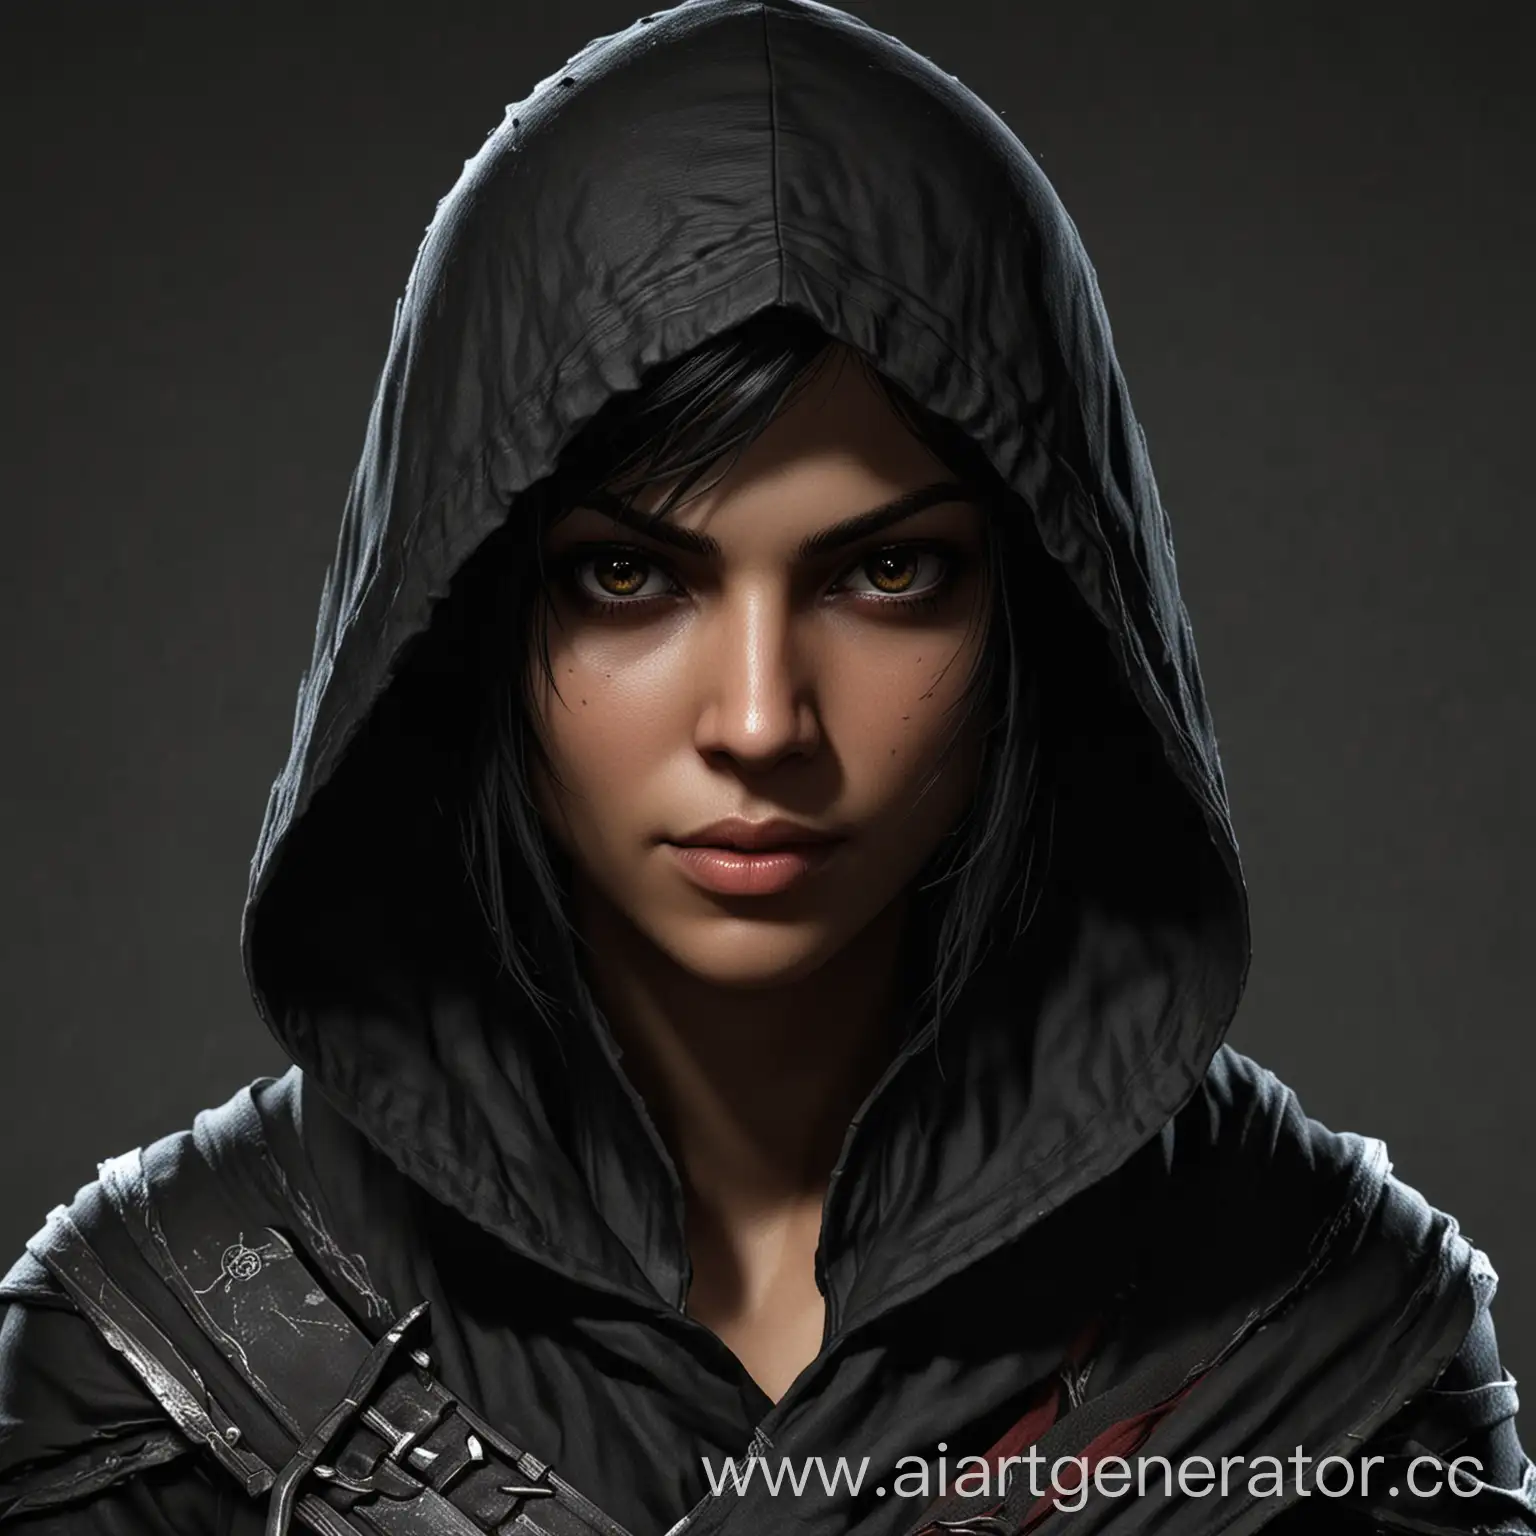 Stealthy-Eastern-Assassin-with-Swarthy-Skin-and-Dark-Hood